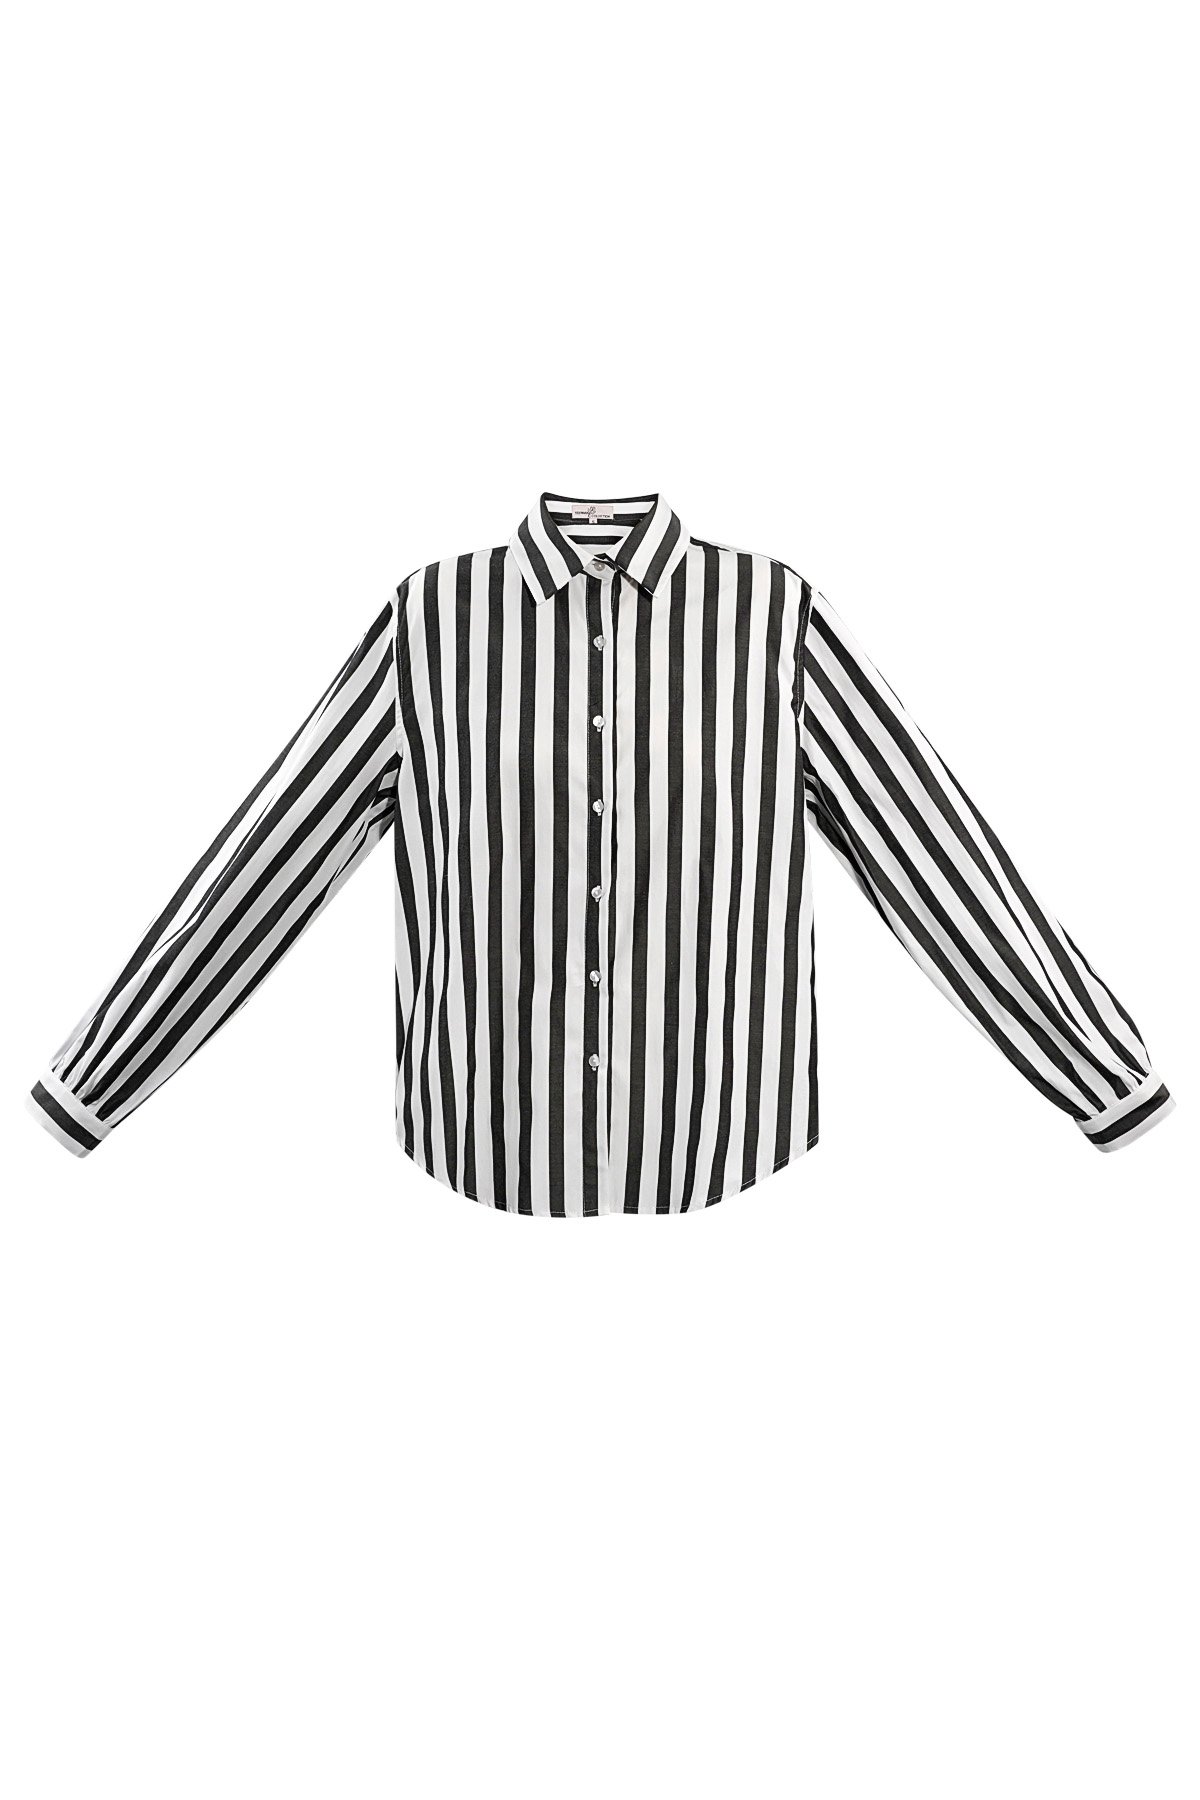 Striped casual blouse - black and white h5 